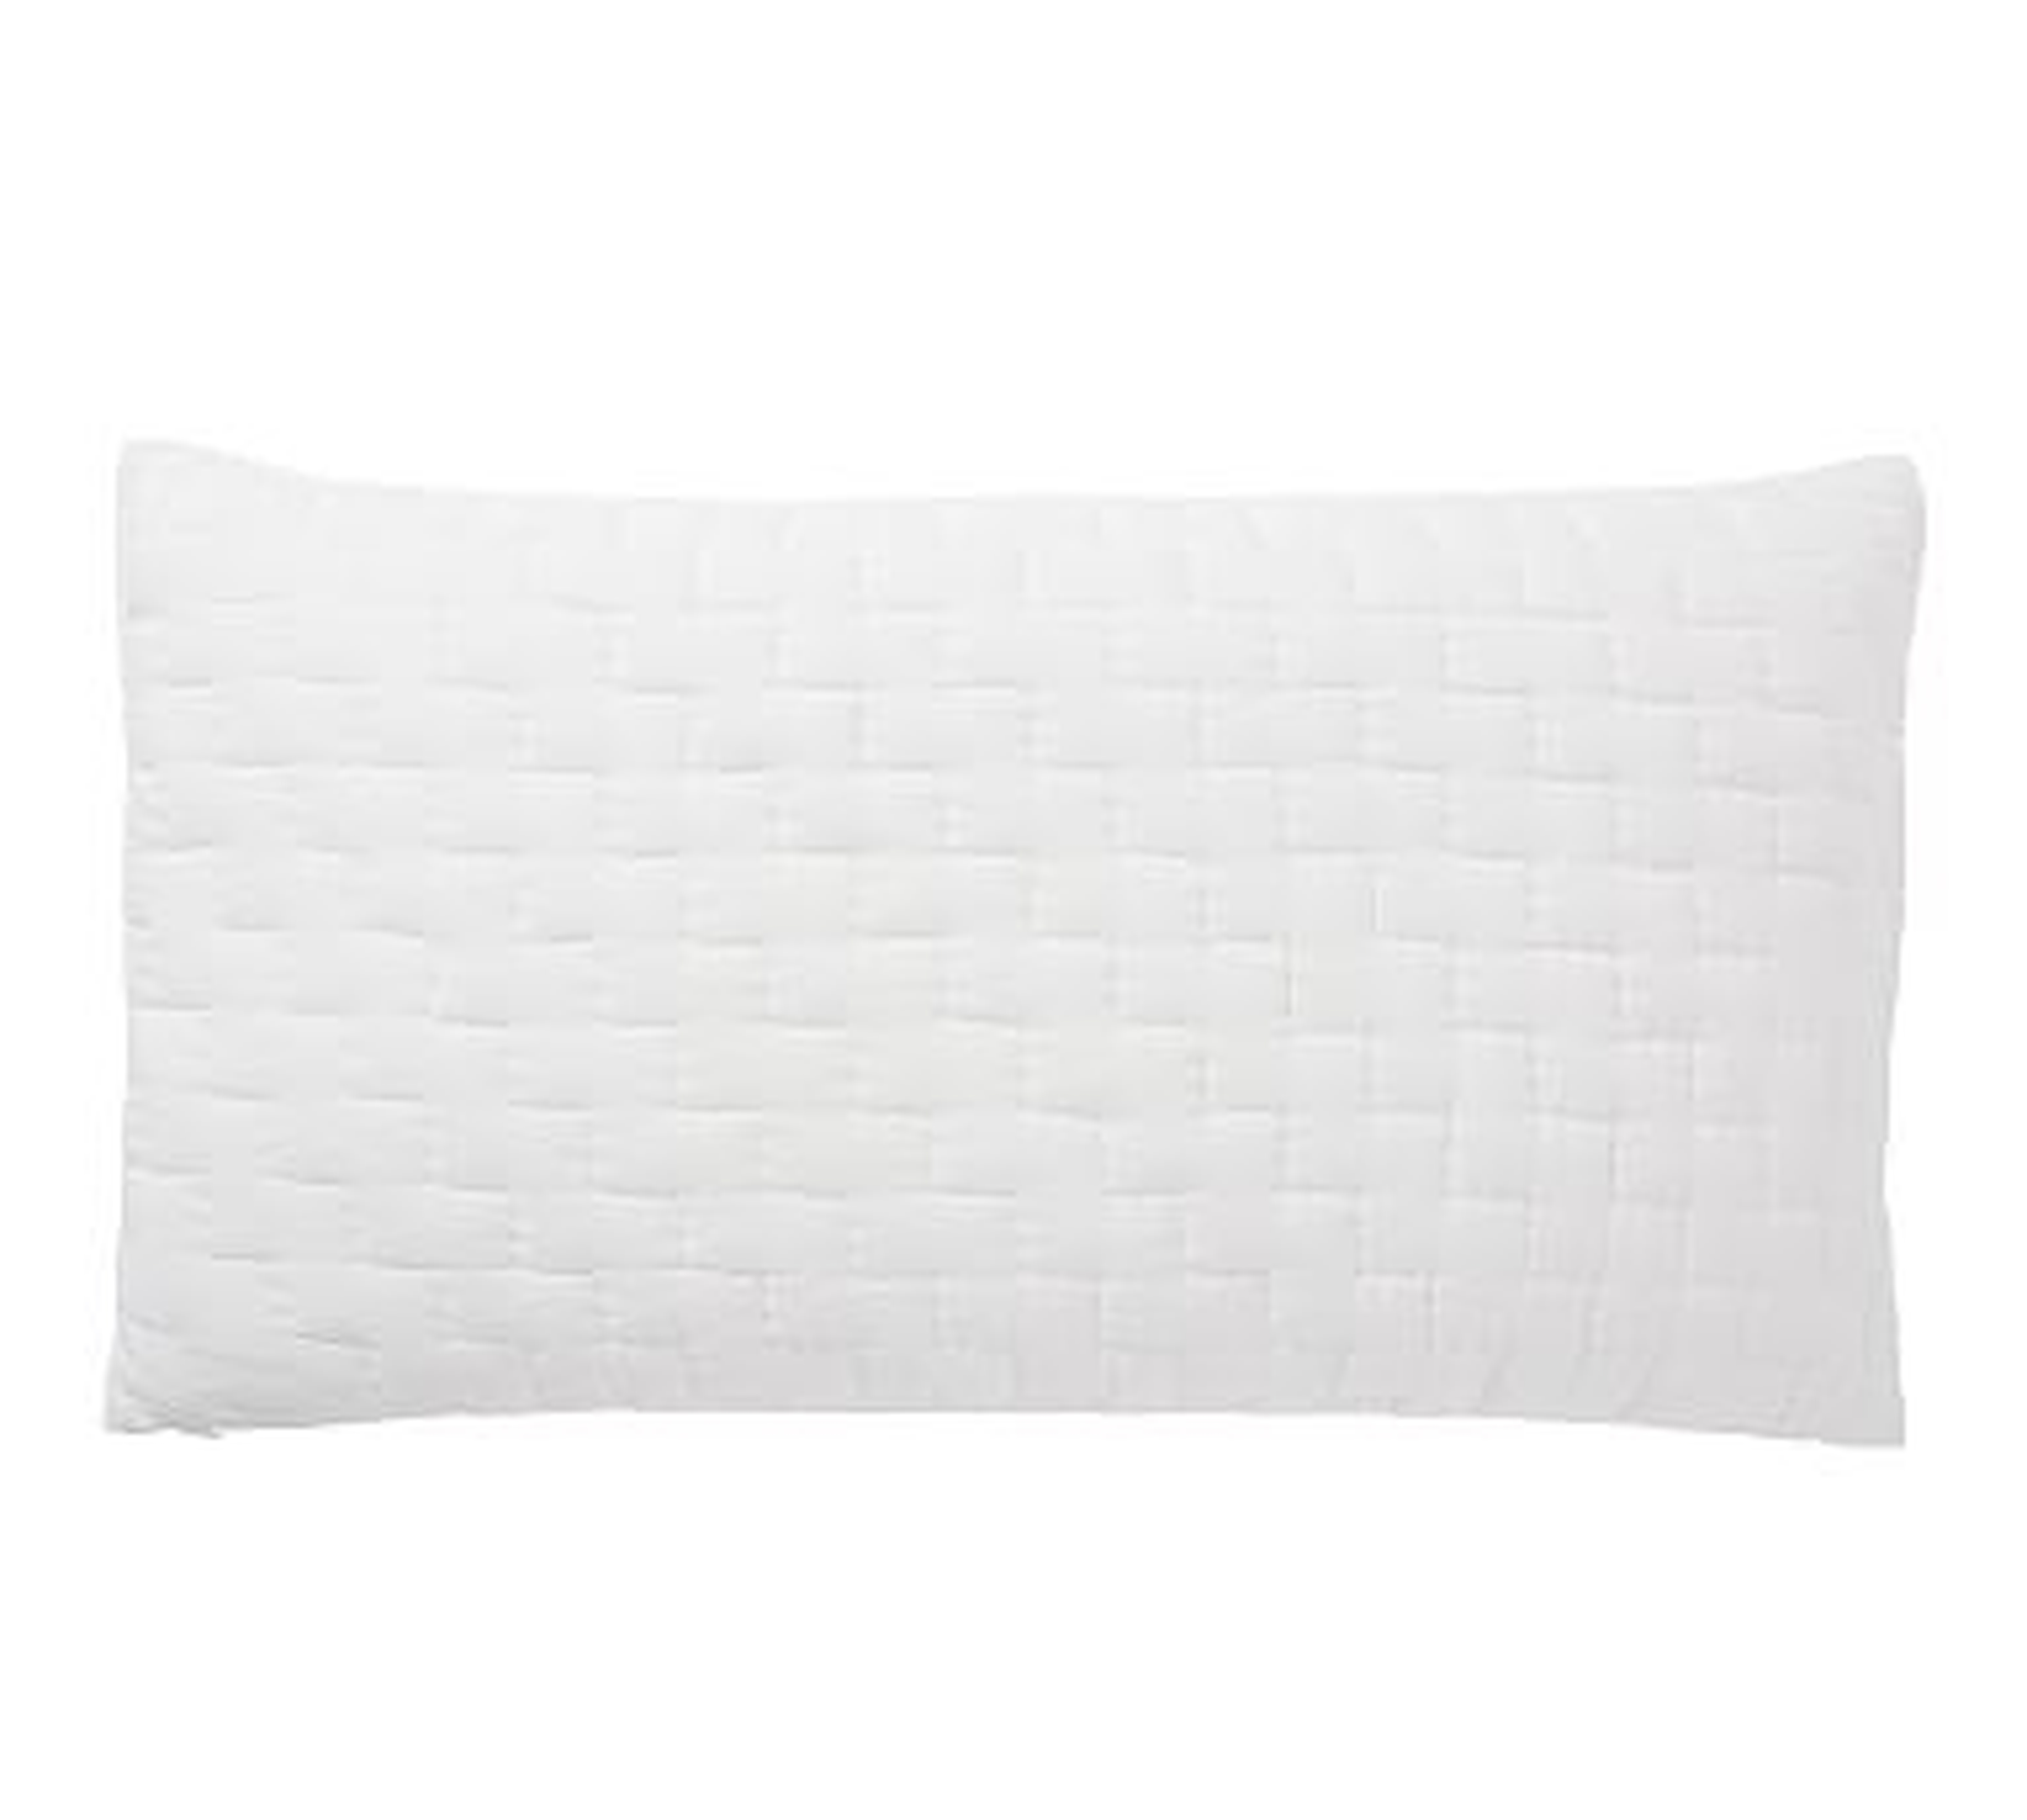 Bliss Handcrafted Linen/Cotton Quilted Sham, King, White - Pottery Barn